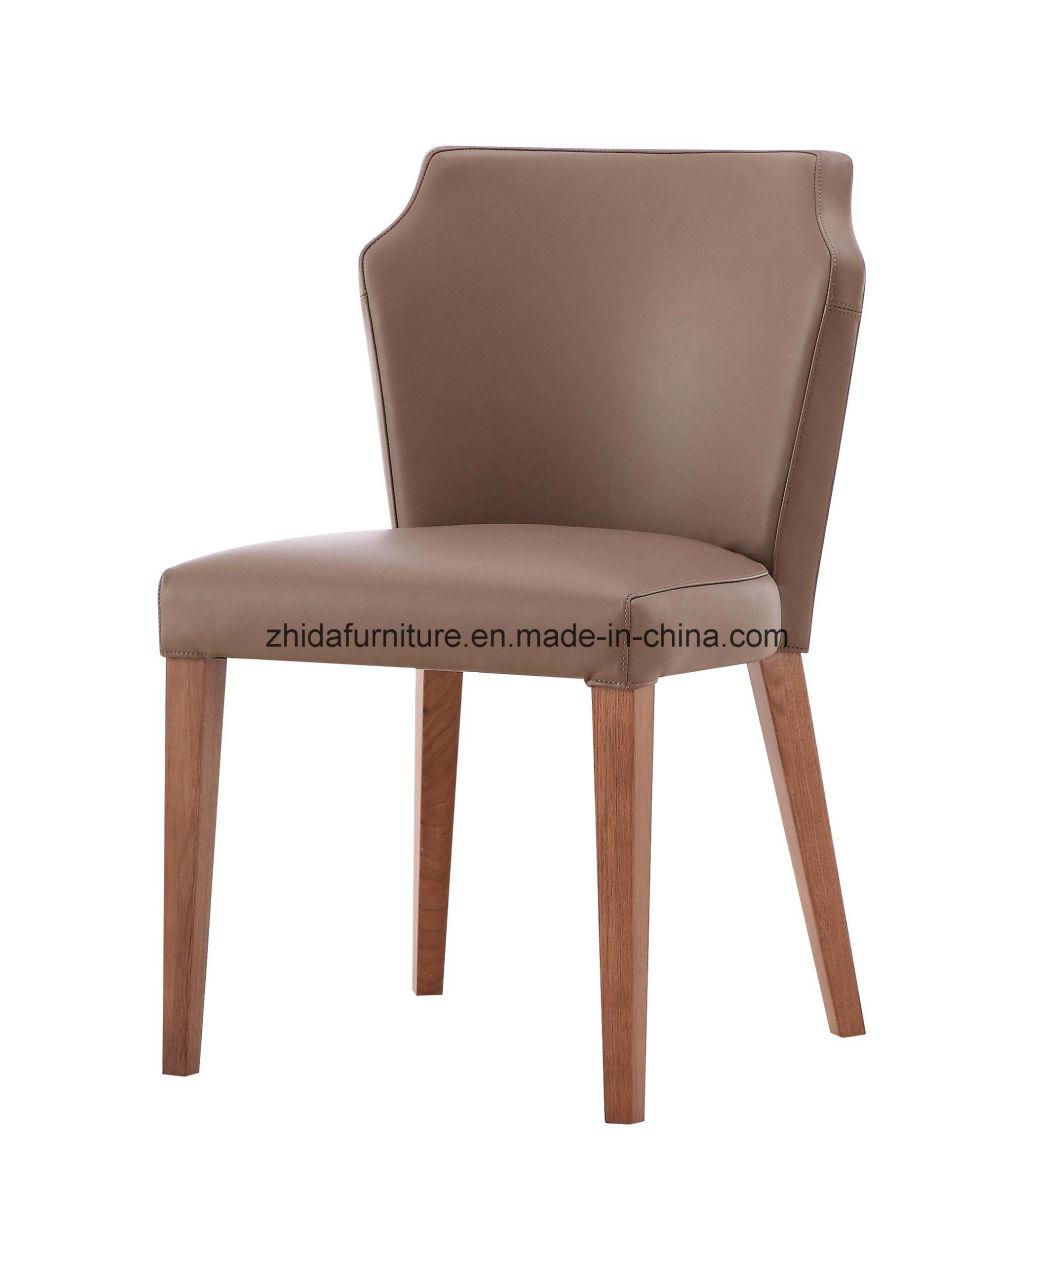 The New Fashion Design Solid Wood Hotel Villa Frame Home Dining Furniture Restaurant Modern Leather Dining Chair